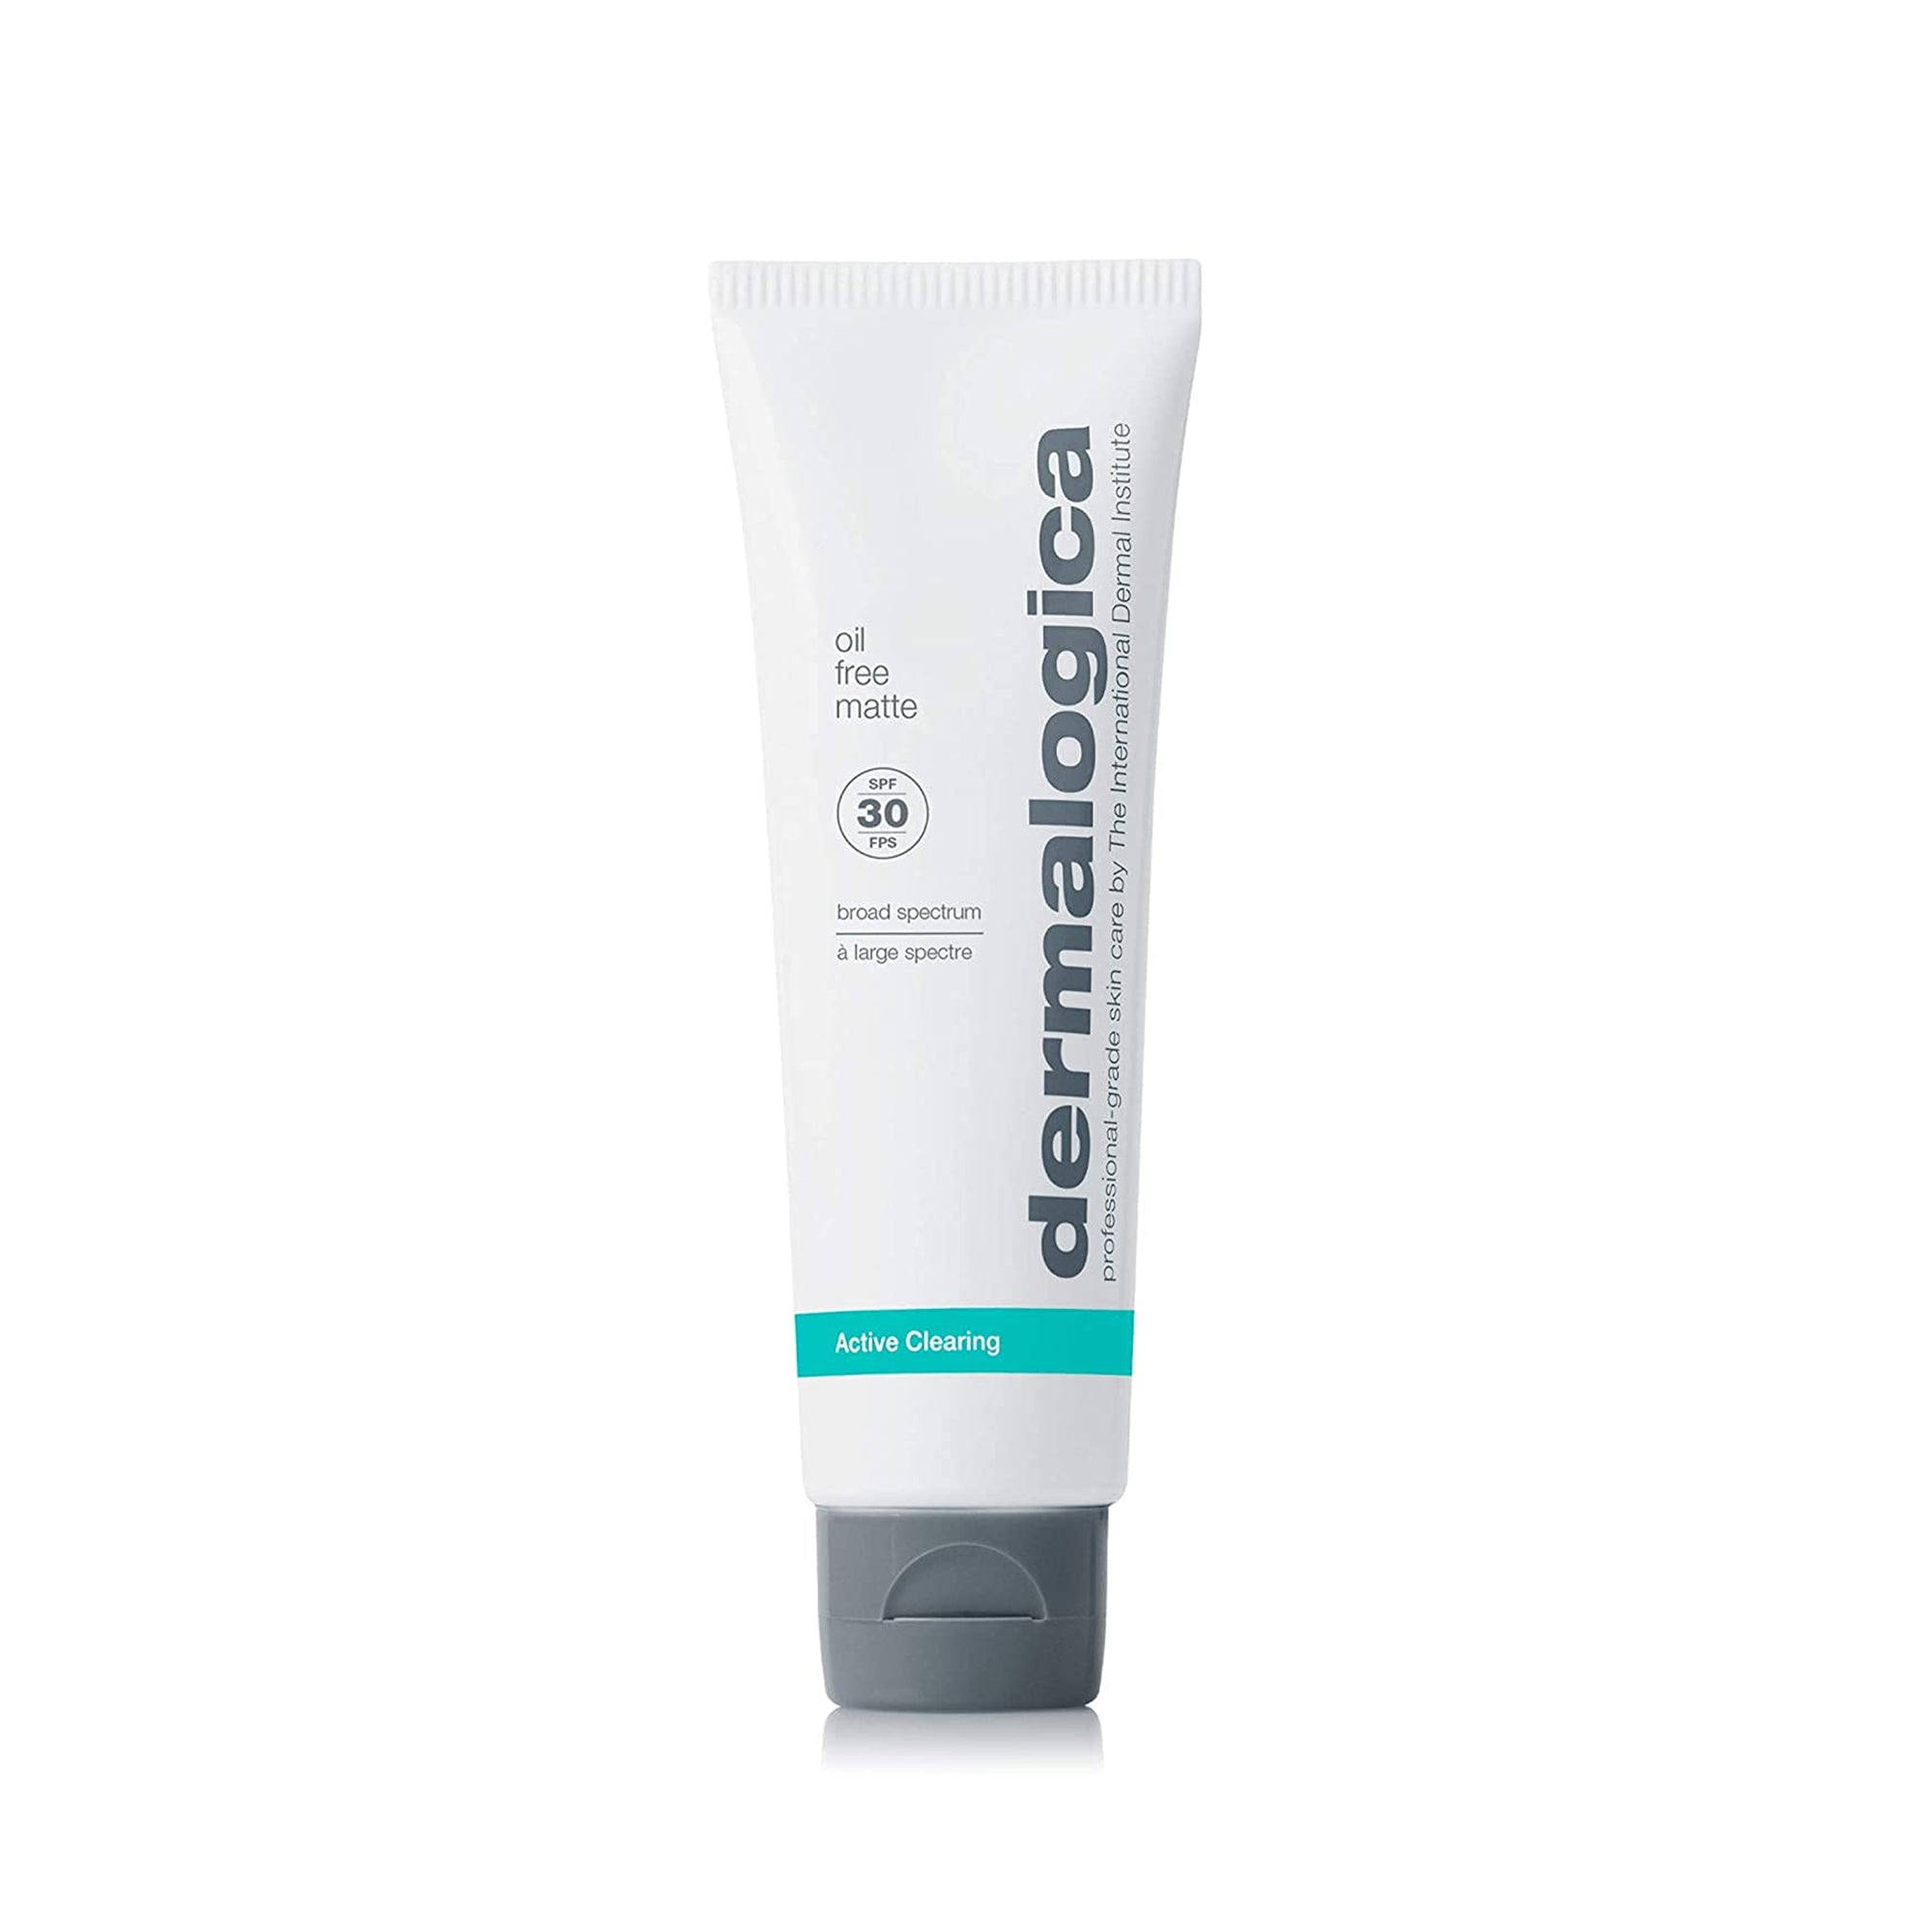 Dermalogica Active Clearing Oil Free Matte SPF30 / 1.7OZ